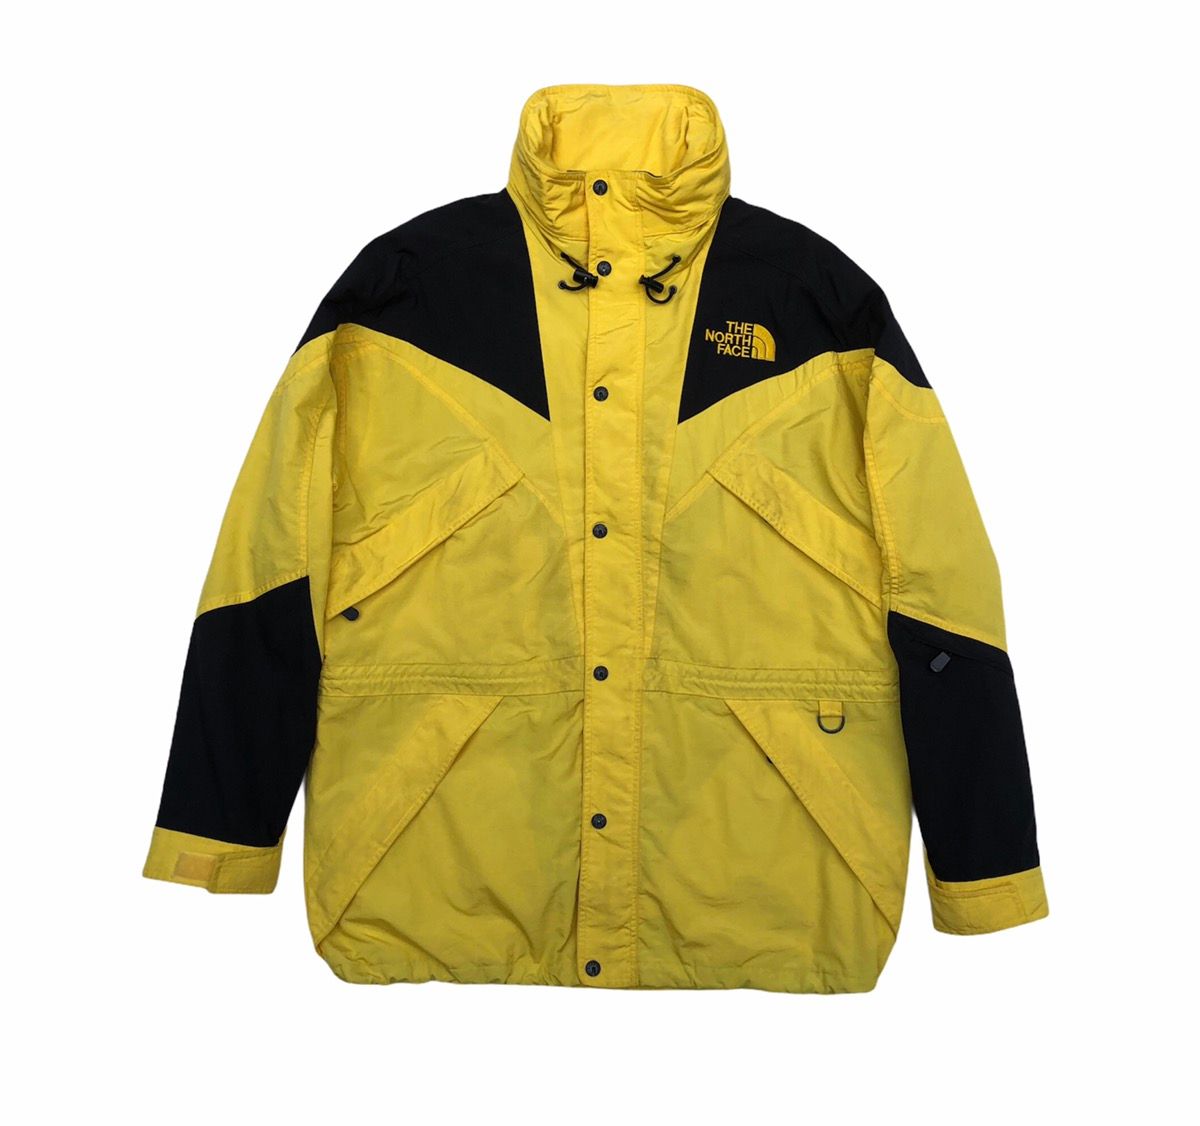 The North Face 🔥The North Face Zip Button Up Man Hooded Jacket Size US L / EU 52-54 / 3 - 1 Preview